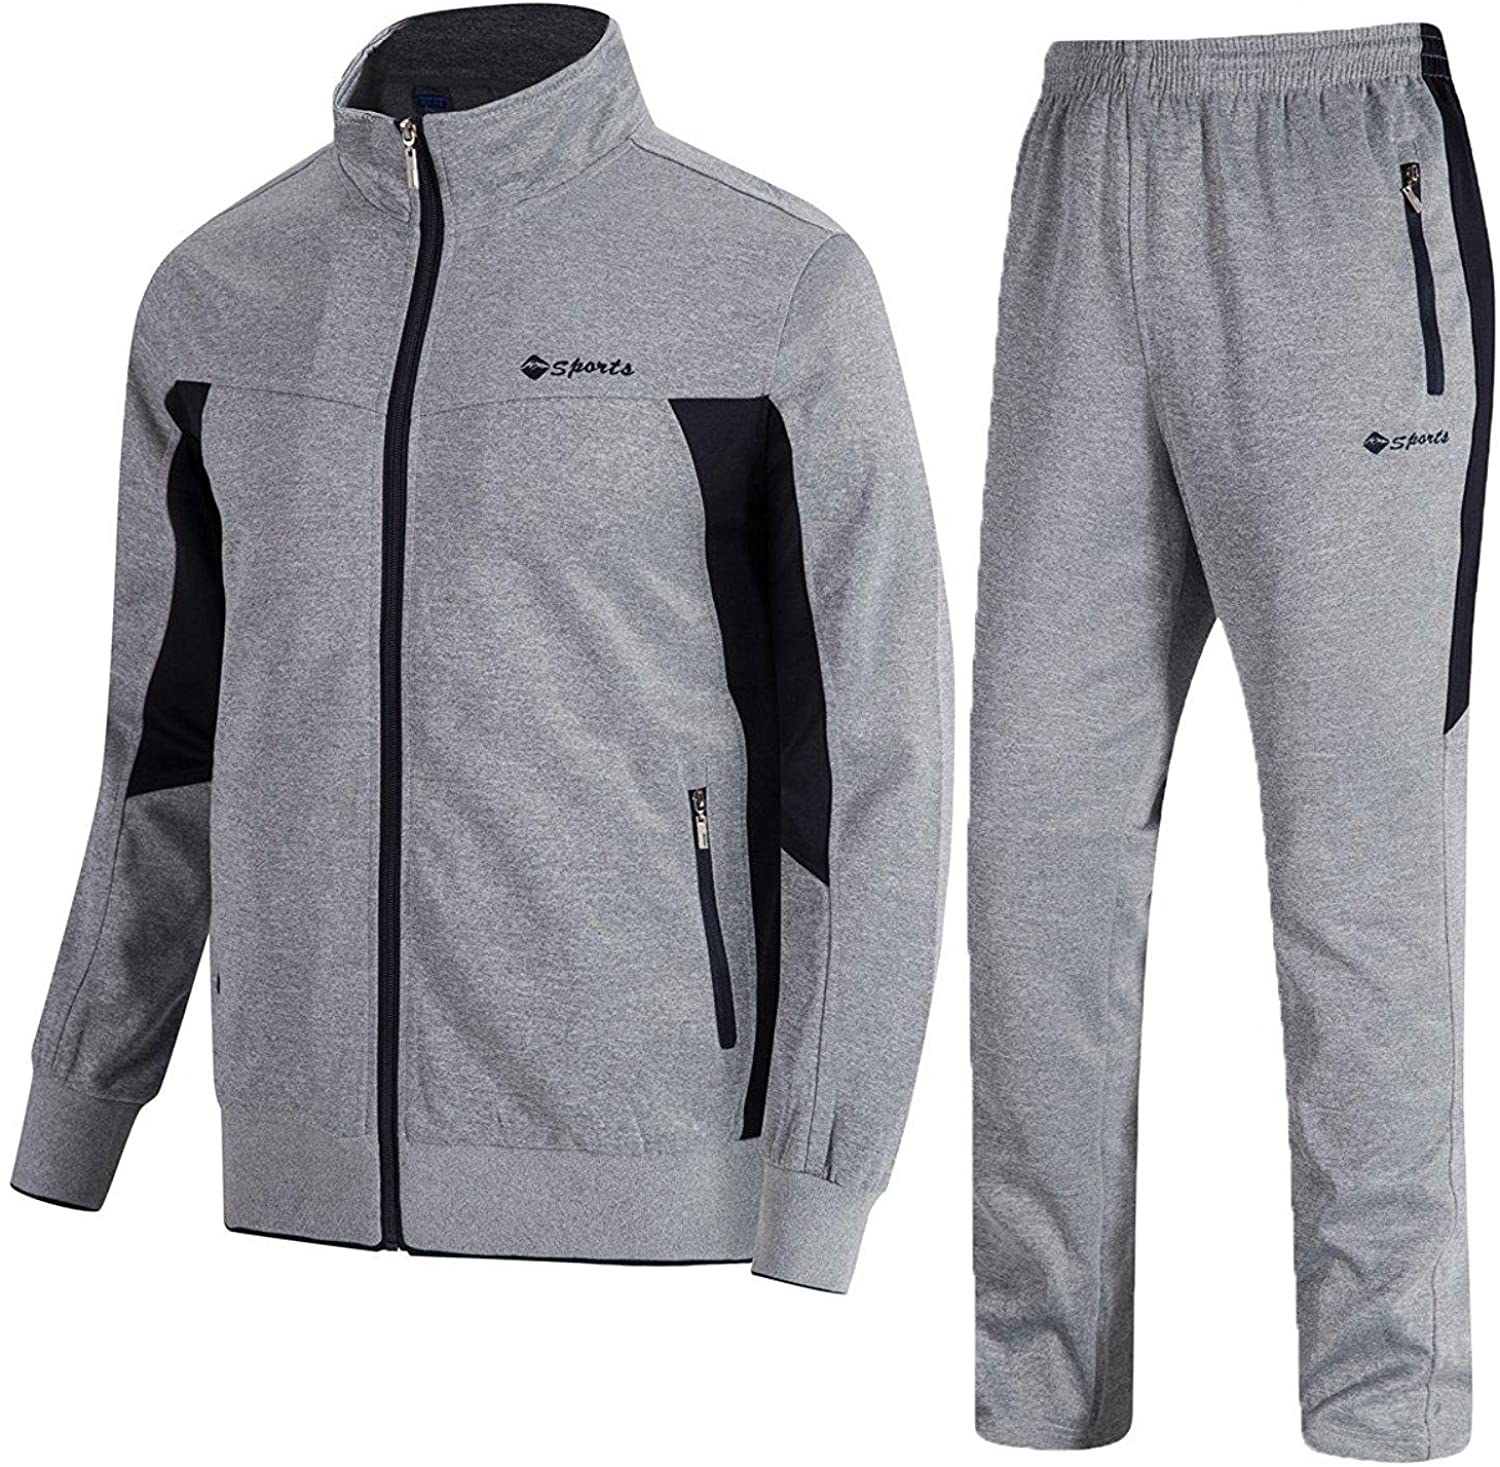 TBMPOY Men's Tracksuit Athletic Sports Casual Full Zip Sweatsuit | eBay